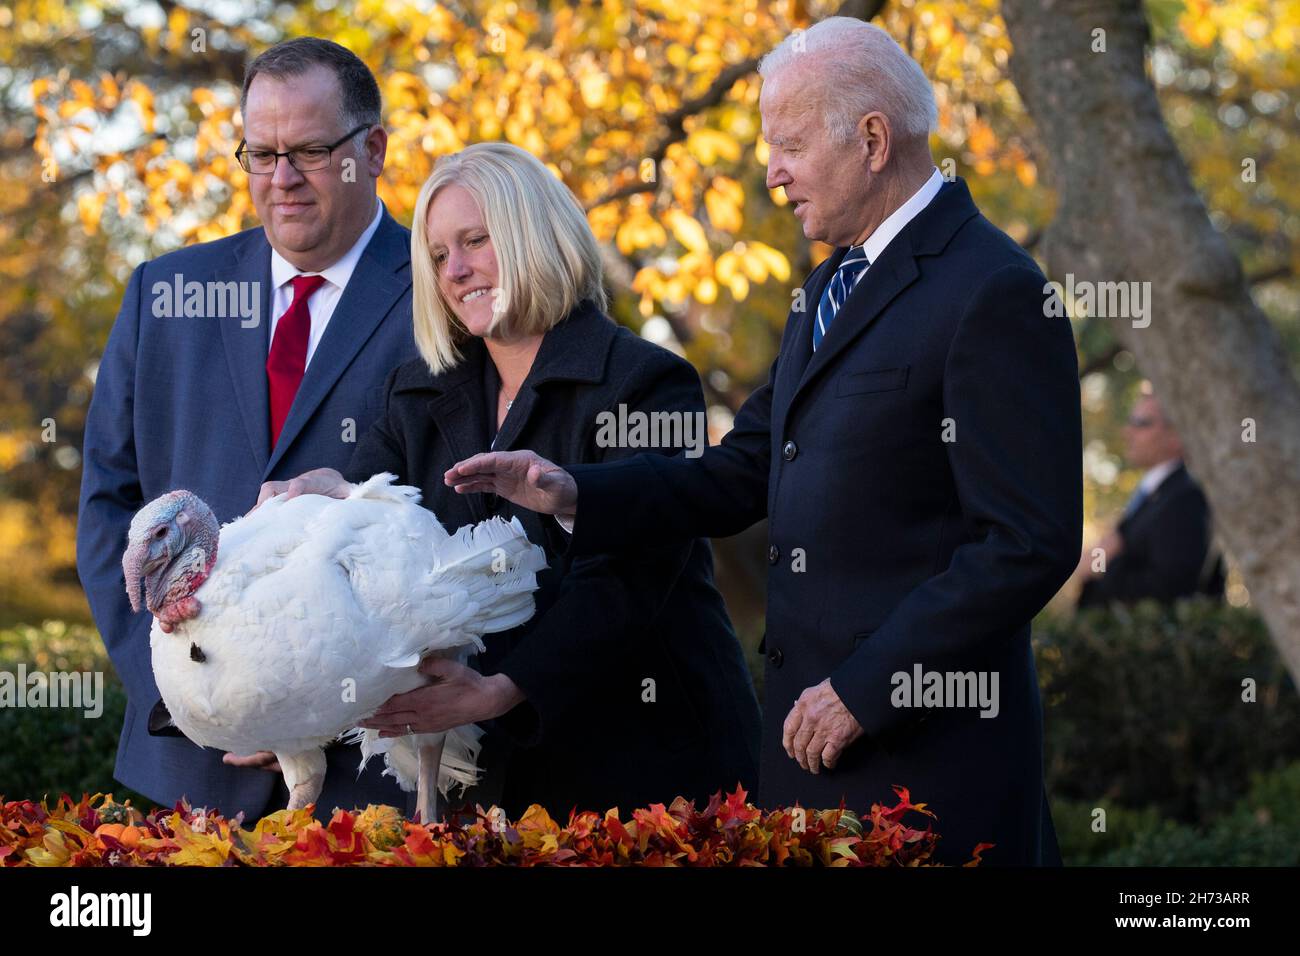 United States President Joe Biden (R) pardons the National Thanksgiving Turkey 'Peanut Butter' during the 74th National Thanksgiving Turkey presentation in the Rose Garden of the White House, beside chairman of the National Turkey Federation Phil Seger (L) and turkey-grower Adrea Welp (C) of Indiana, in Washington, DC, USA, 19 November 2021. The 2021 National Thanksgiving Turkey and its alternate, named 'Peanut Butter' and 'Jelly' respectively, were raised near Jasper, Indiana. The pardoning ceremony is an annual tradition held ahead of the Thanksgiving holiday. Credit: Michael Reynolds/Pool Stock Photo